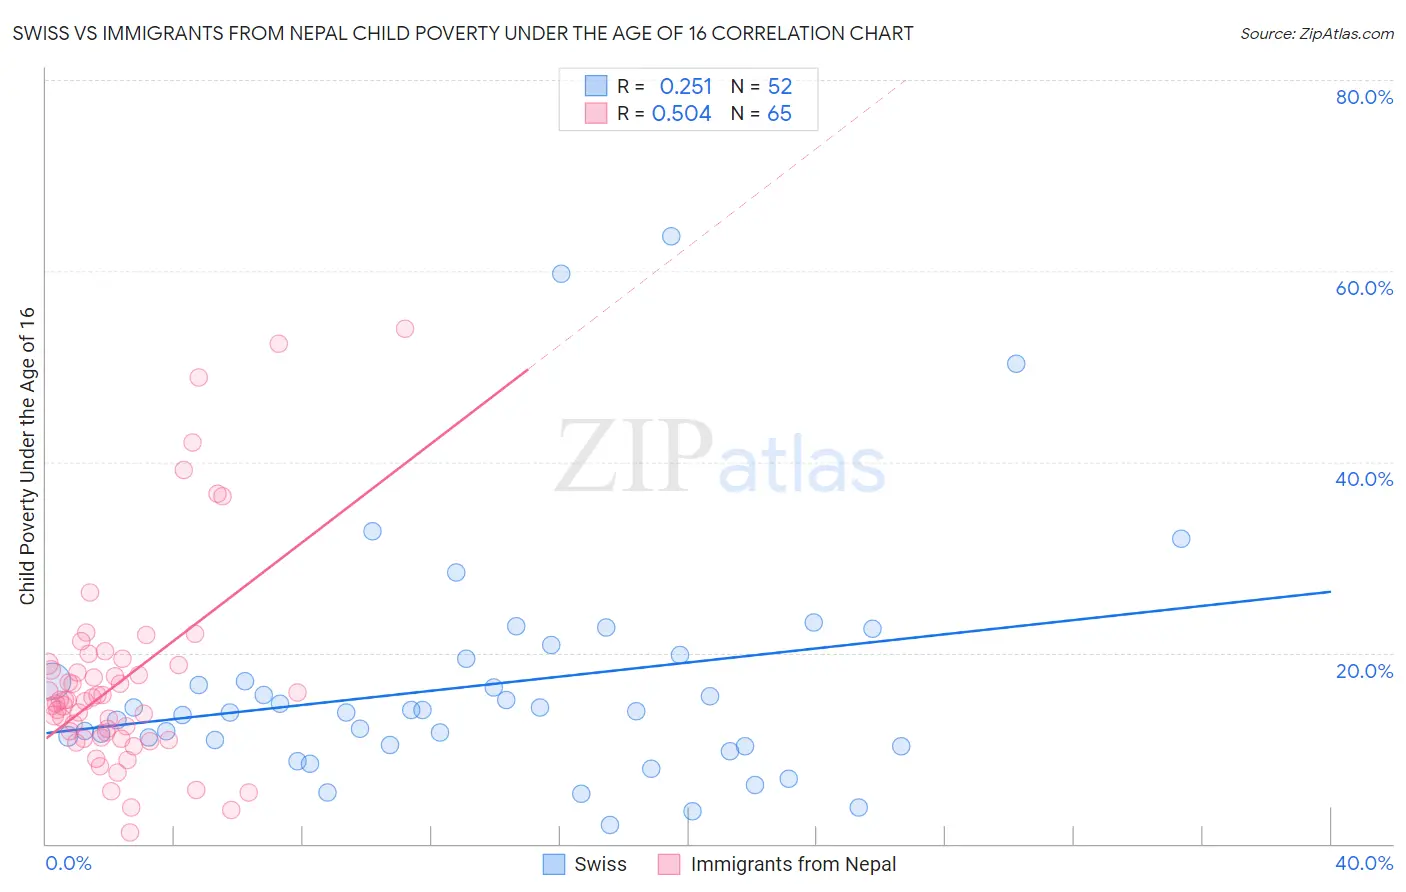 Swiss vs Immigrants from Nepal Child Poverty Under the Age of 16